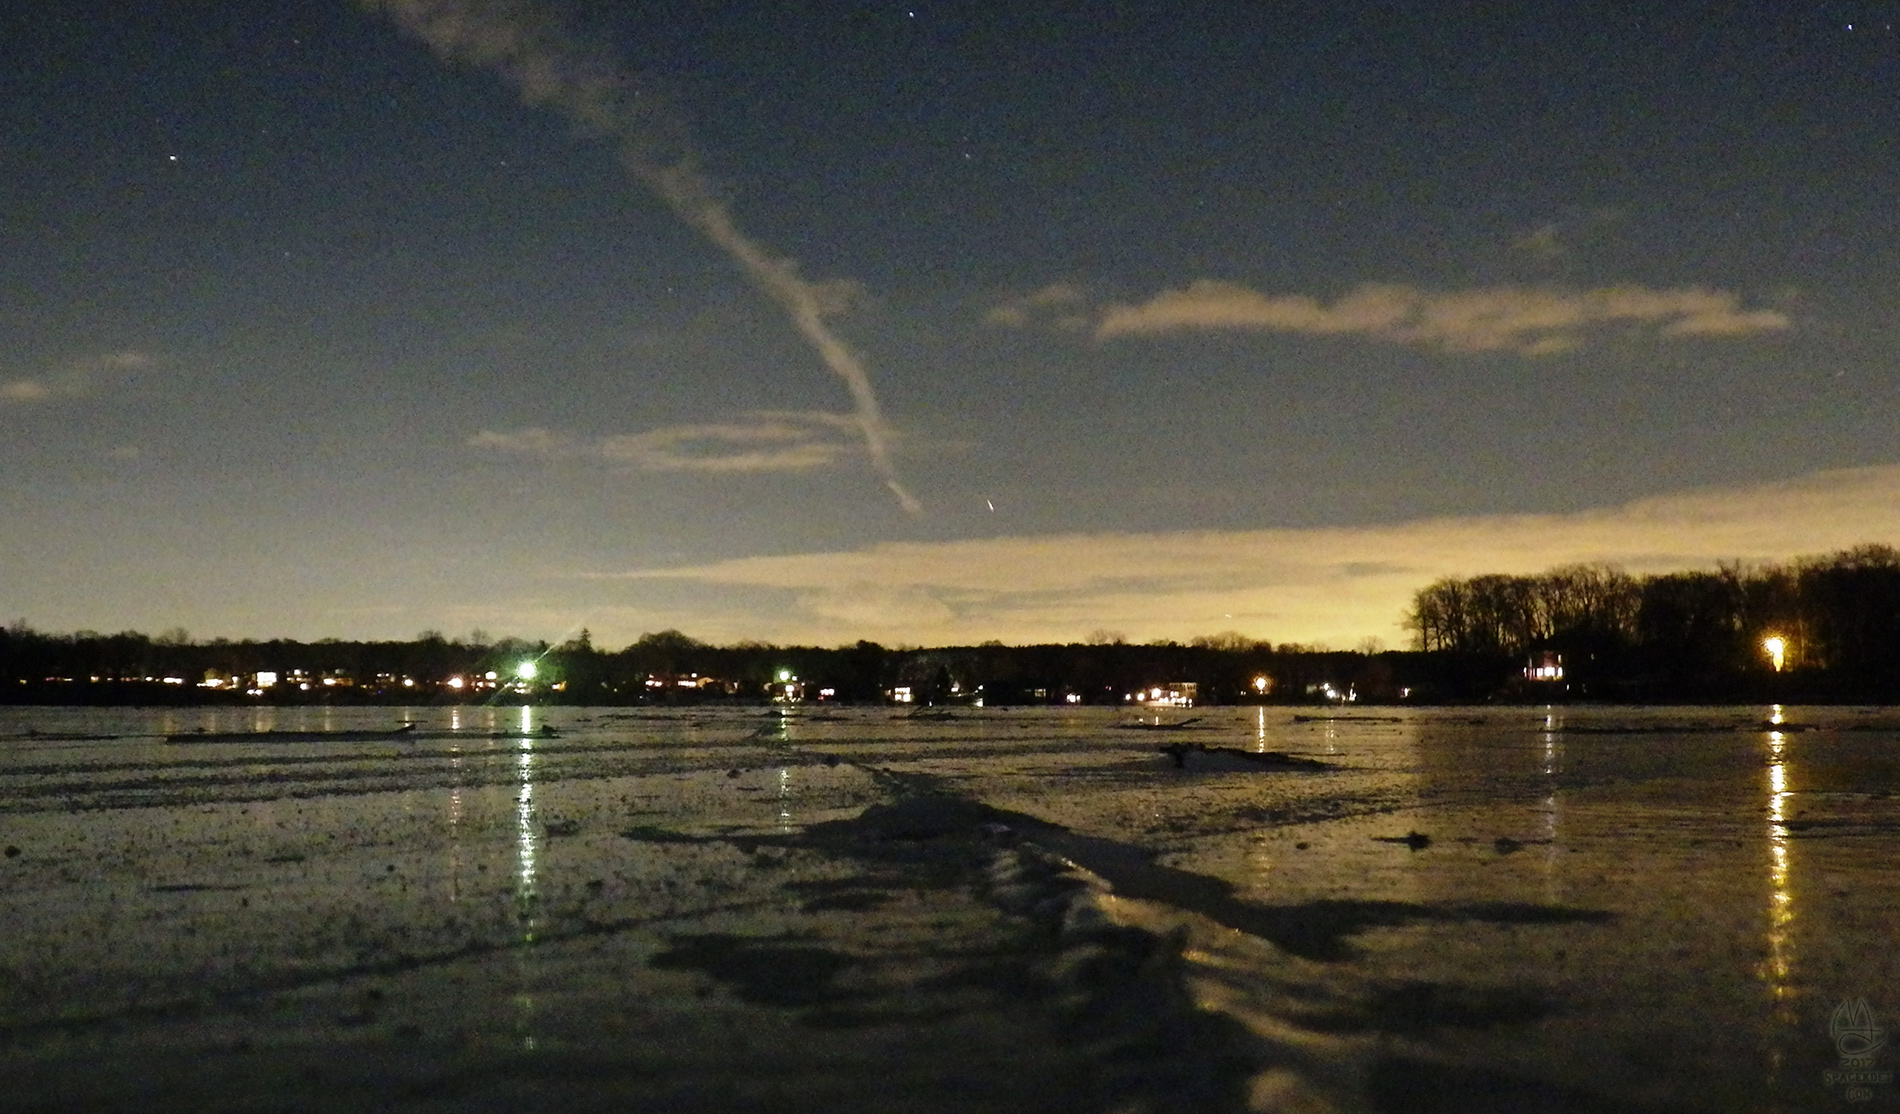 Commerce Lake ice at night. Looking north-east.